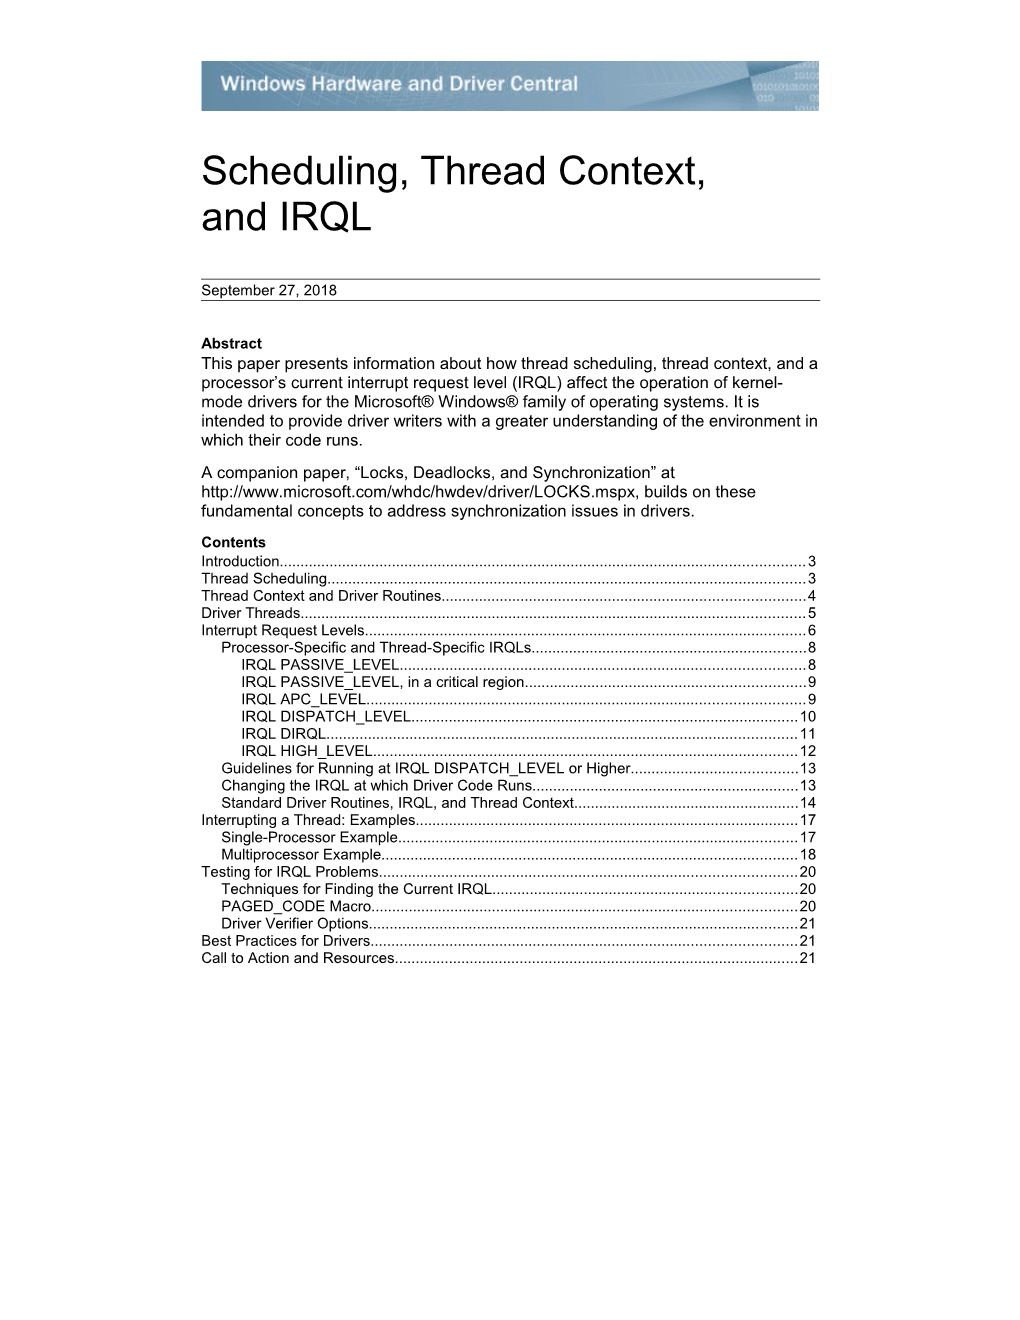 Scheduling, Thread Context, and IRQL